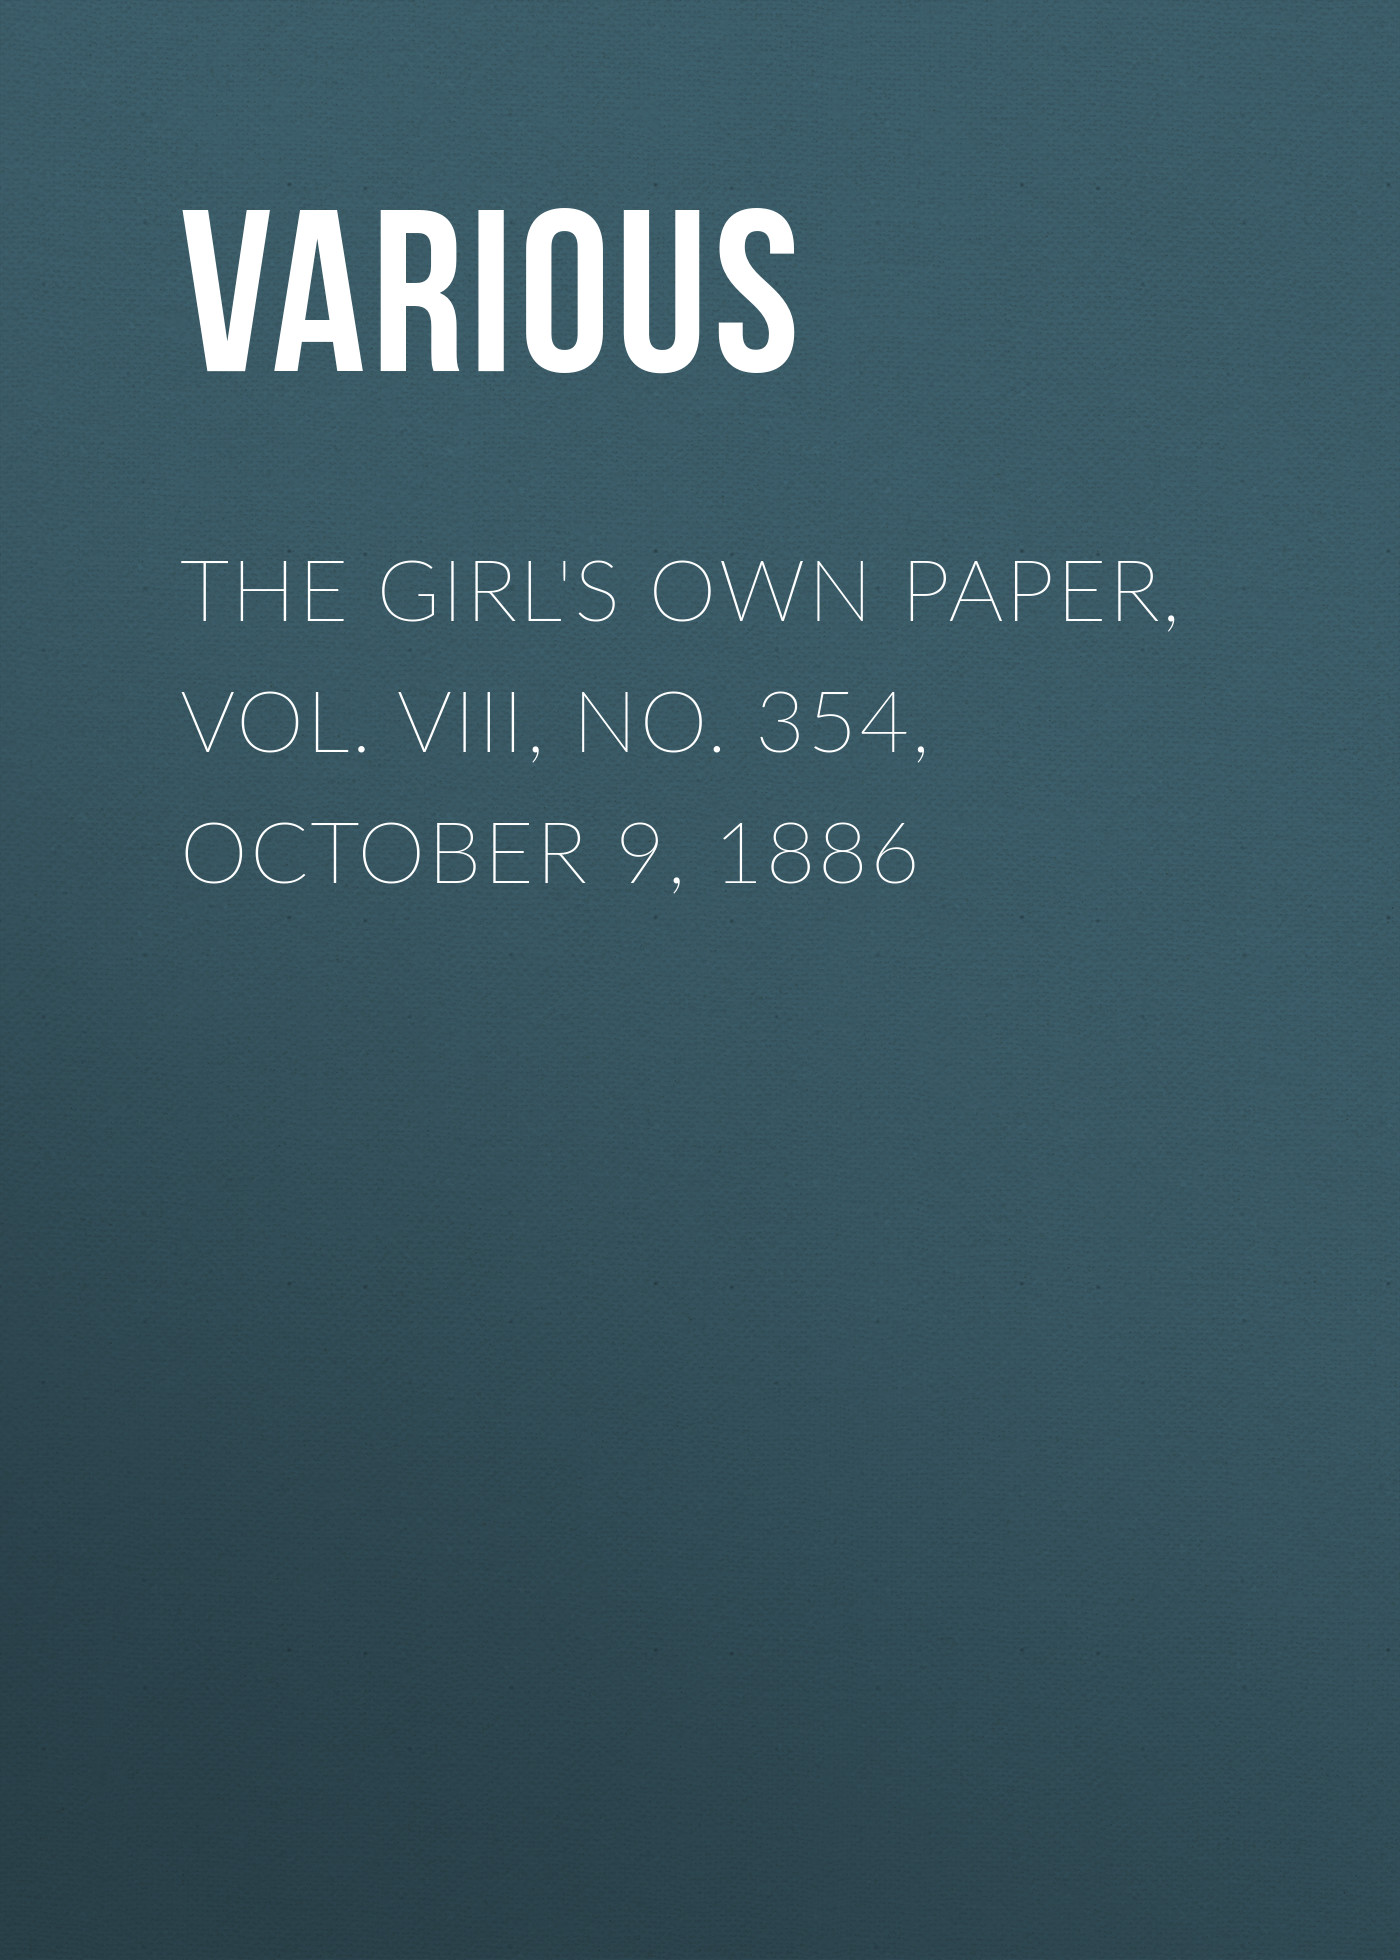 Various The Girl's Own Paper, Vol. VIII, No. 354, October 9, 1886